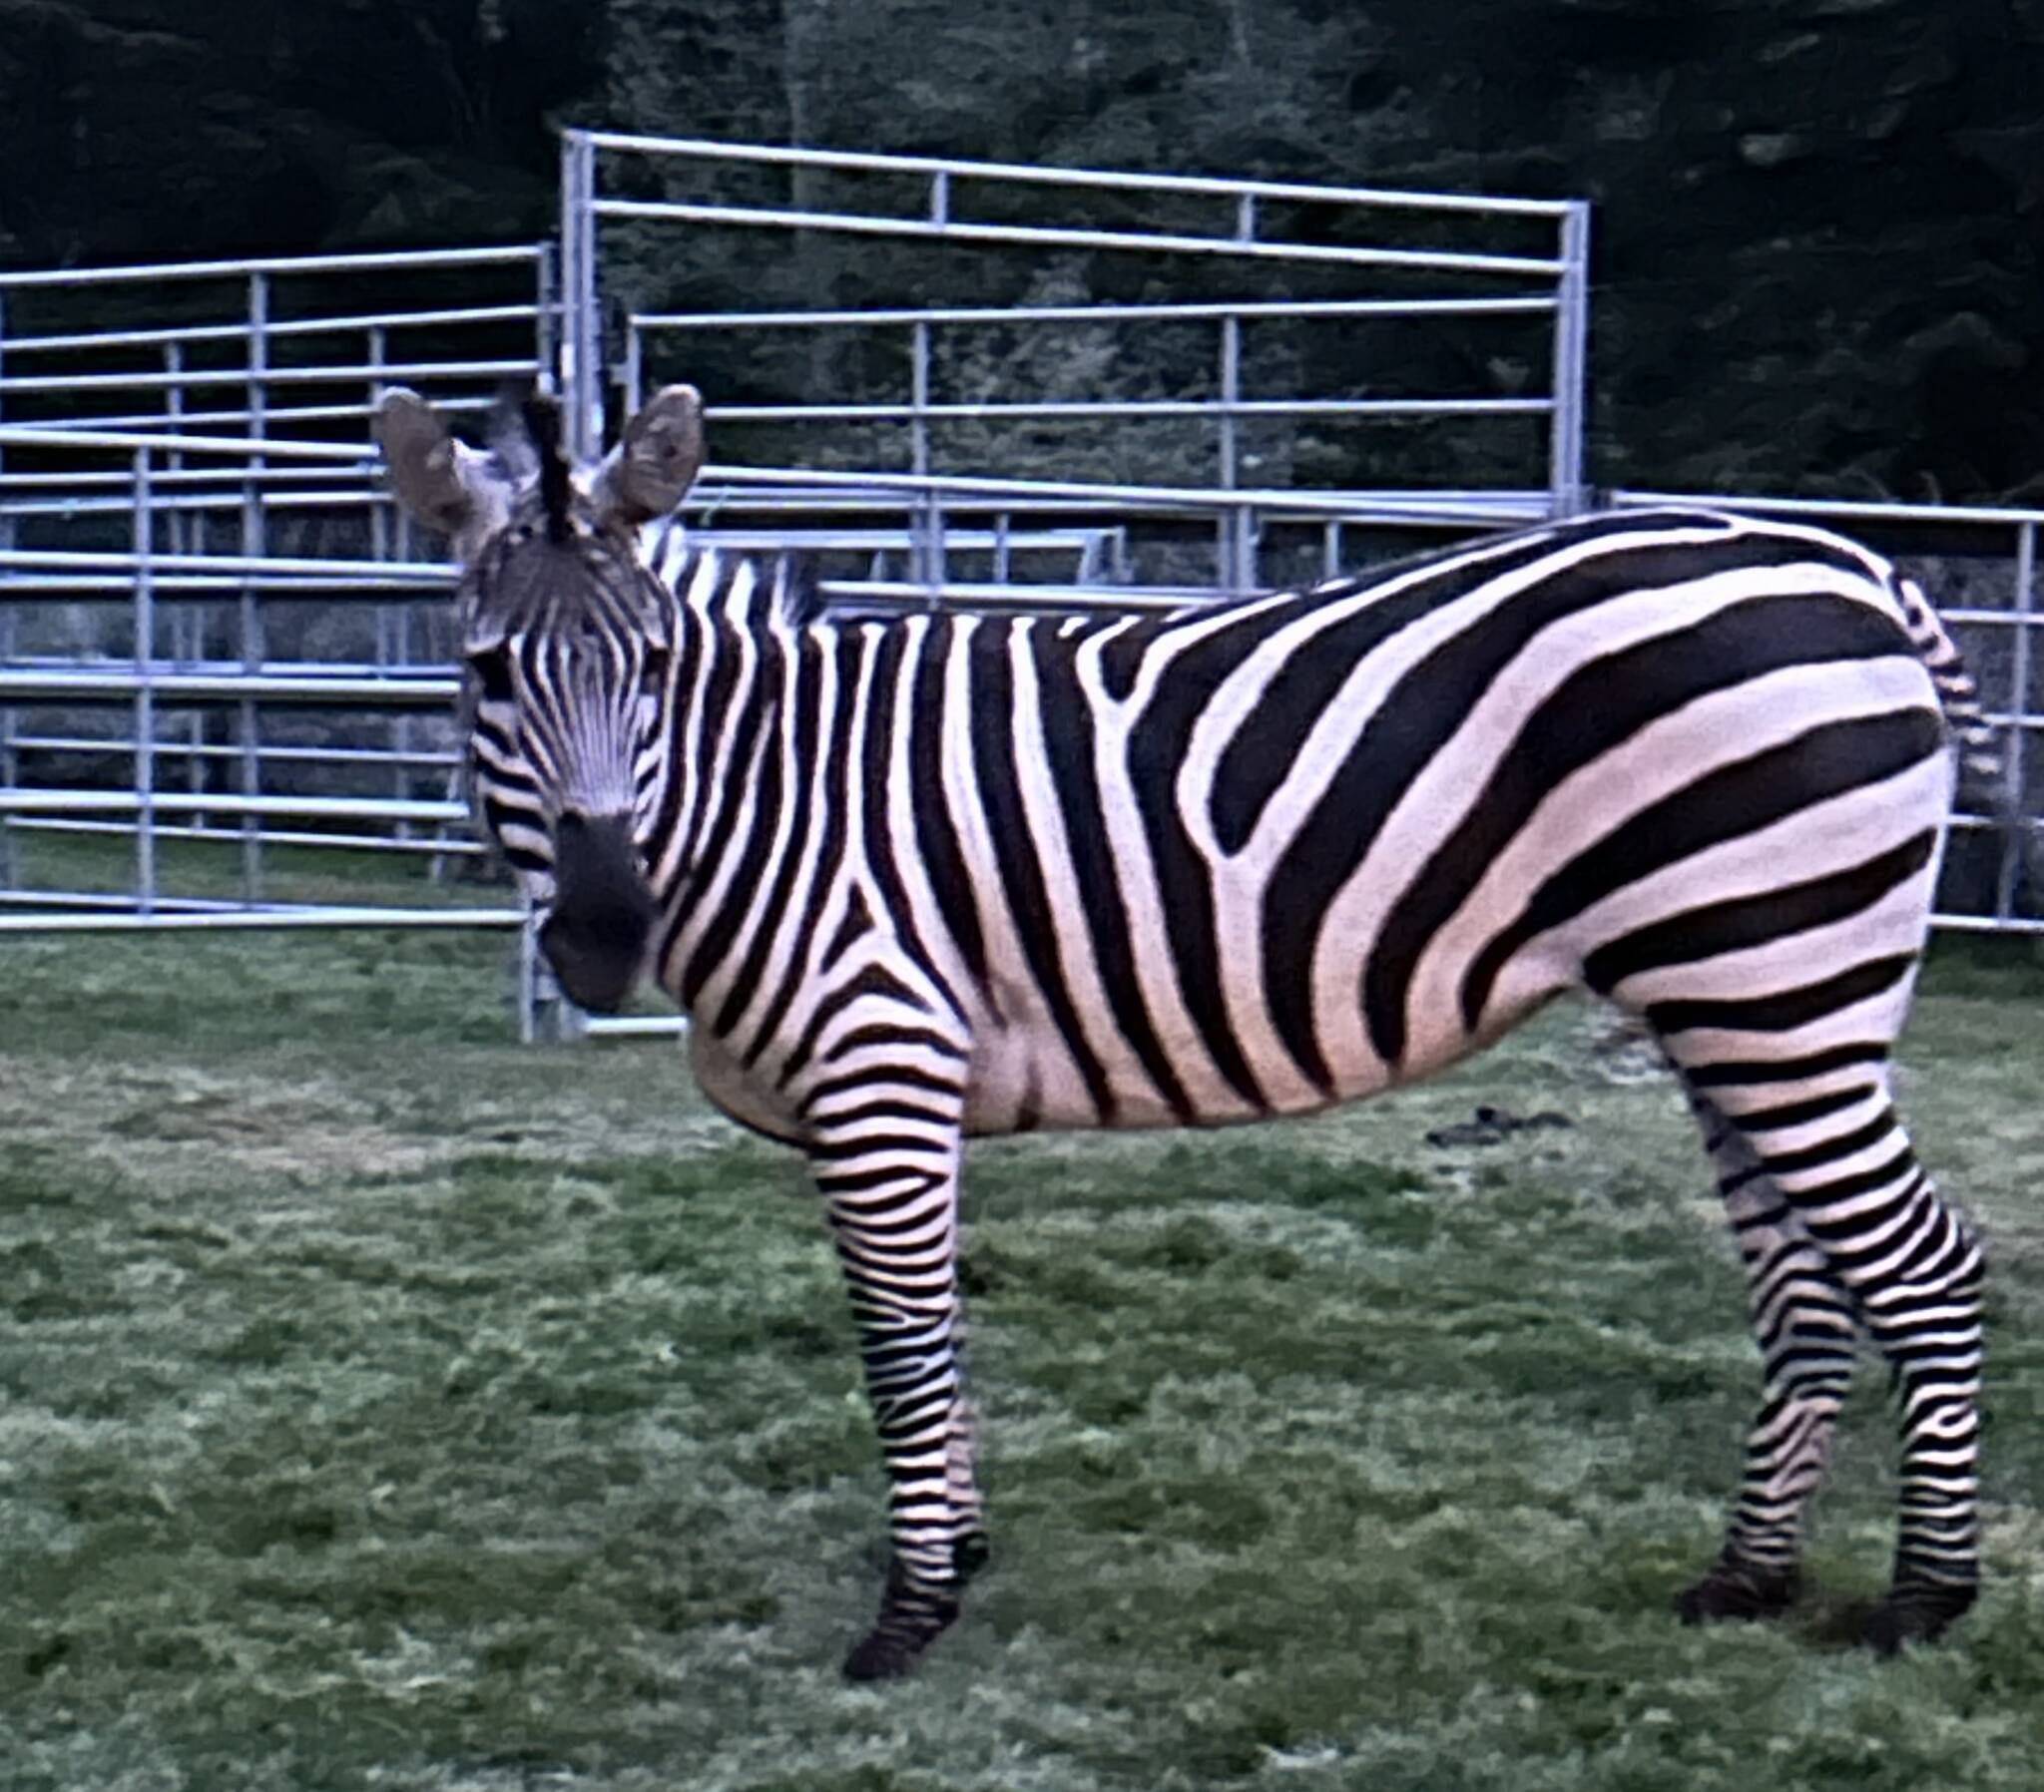 A zebra, named "Sugar," stands in an enclosure in North Bend on May 3, five days after it escaped from a trailer near I-90. Elma residents Larry and Gwen Mielke were called in to assist with the capture effort. (Gwen Mielke)